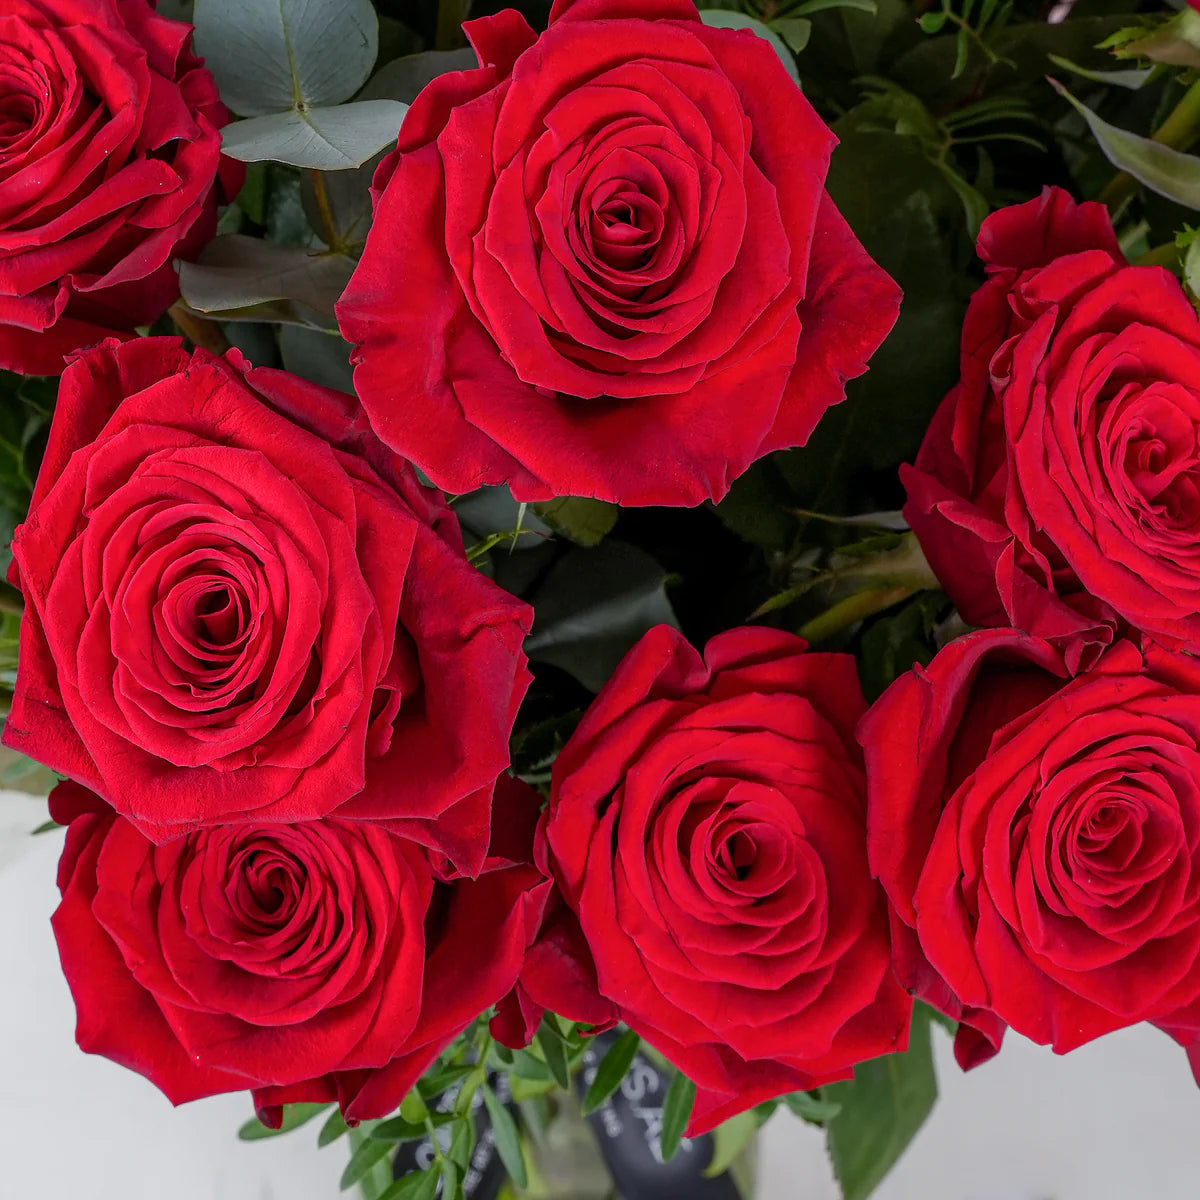 Valentines 100 red roses in a vase - Floral Fashion Boutique